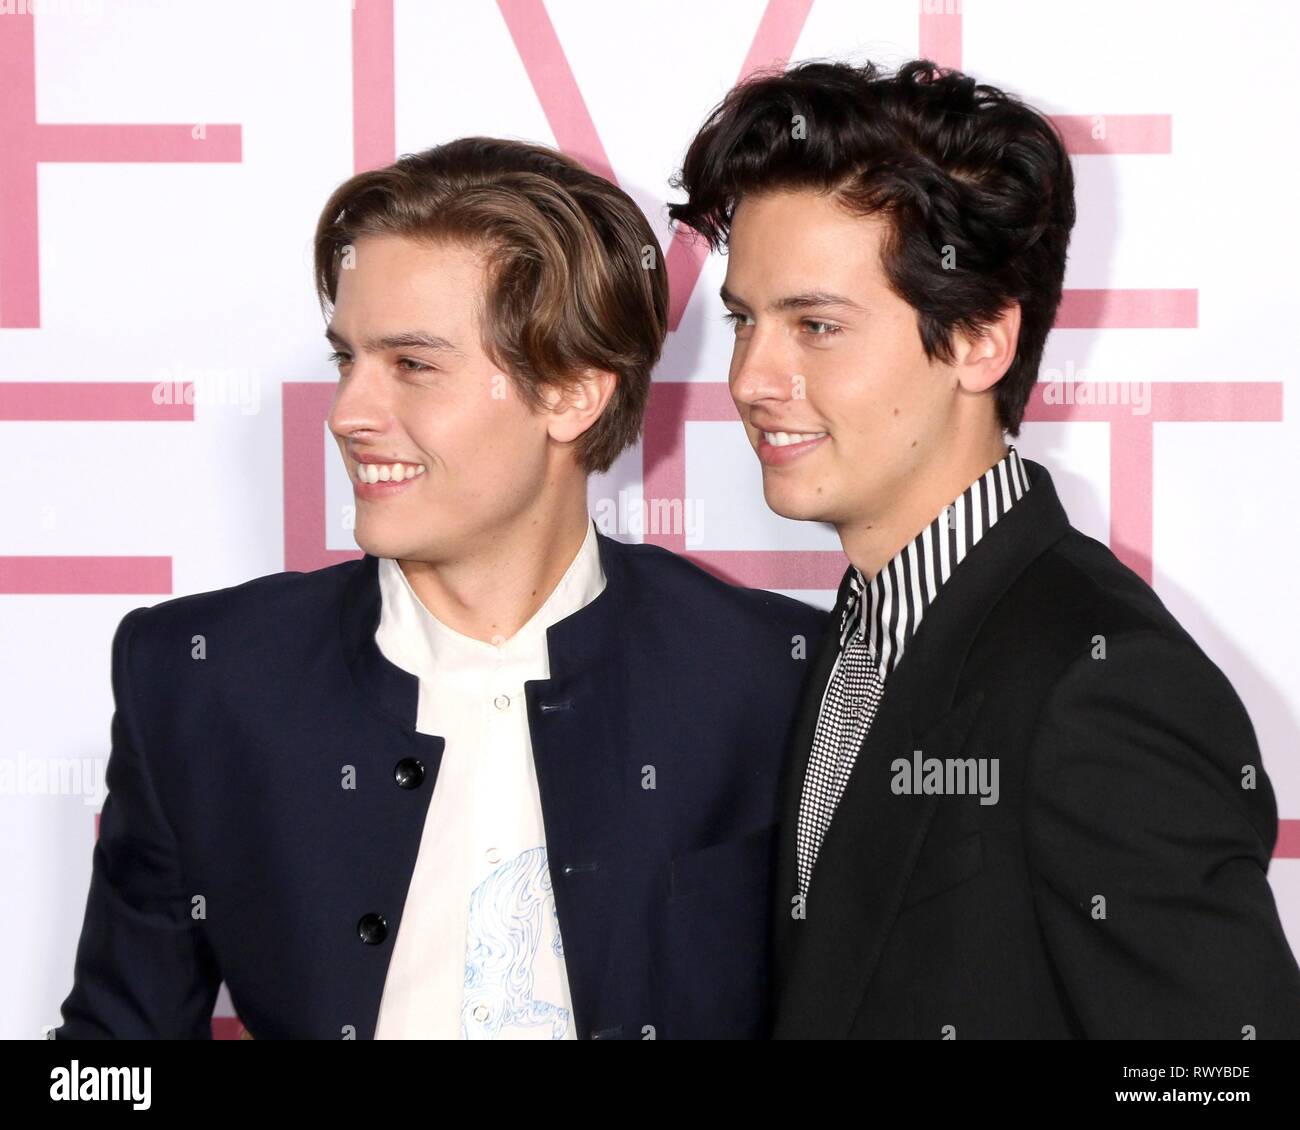 Los Angeles, CA, USA. 7th Mar, 2019. Dylan Sprouse, Cole Sprouse at arrivals for FIVE FEET APART Premiere, Fox Bruin Theater, Los Angeles, CA March 7, 2019. Credit: Priscilla Grant/Everett Collection/Alamy Live News Stock Photo